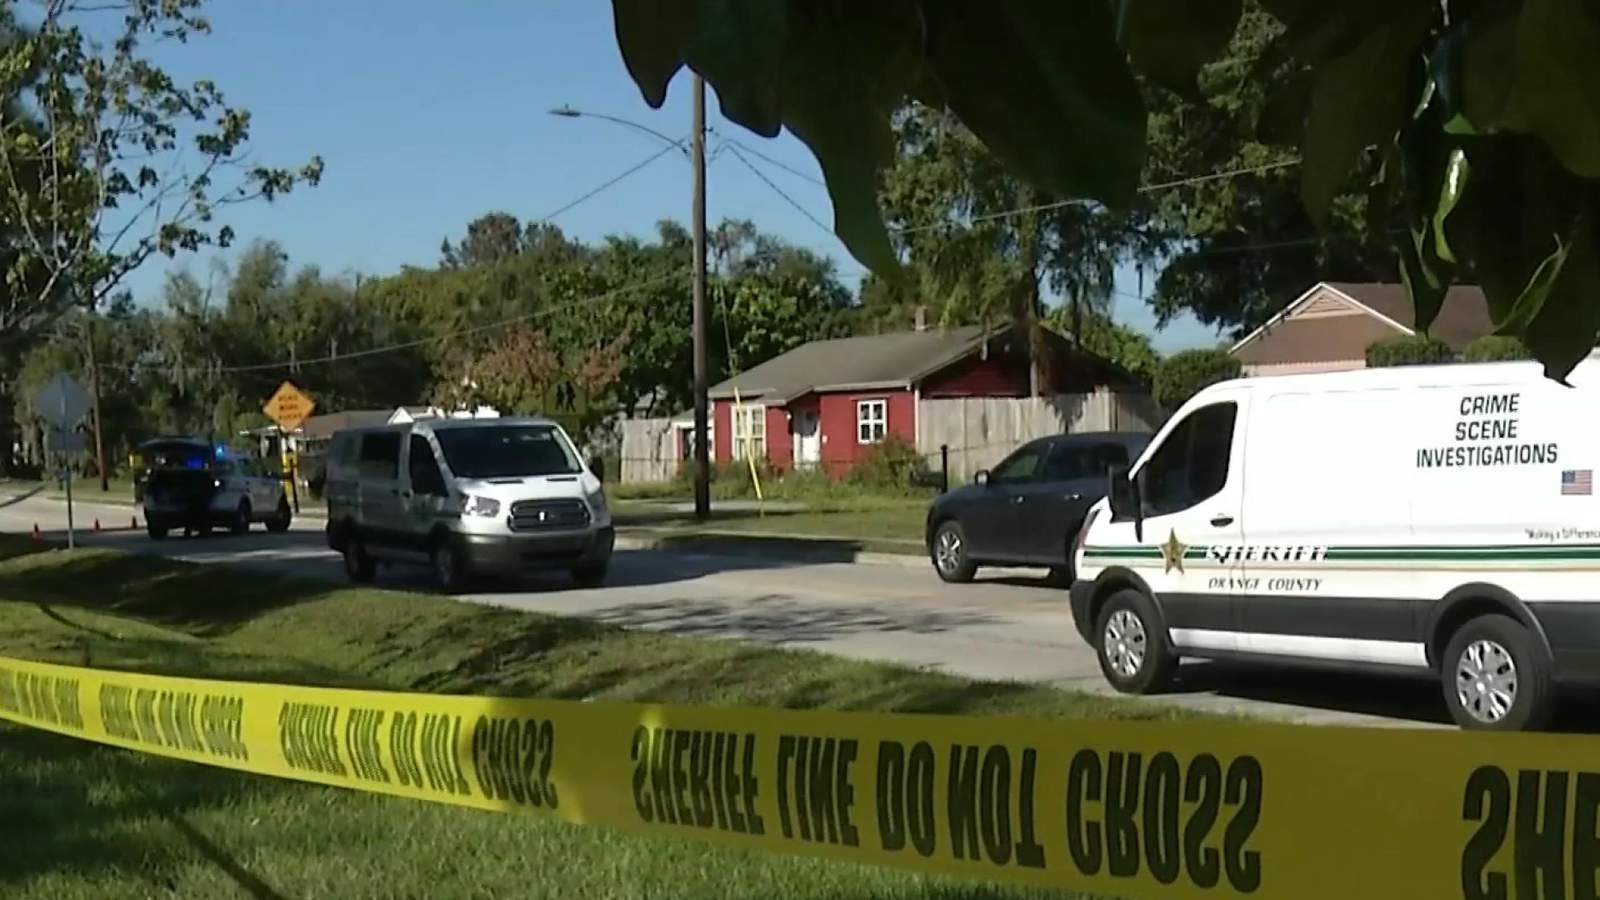 Man found dead in home after wounded woman shows up at hospital